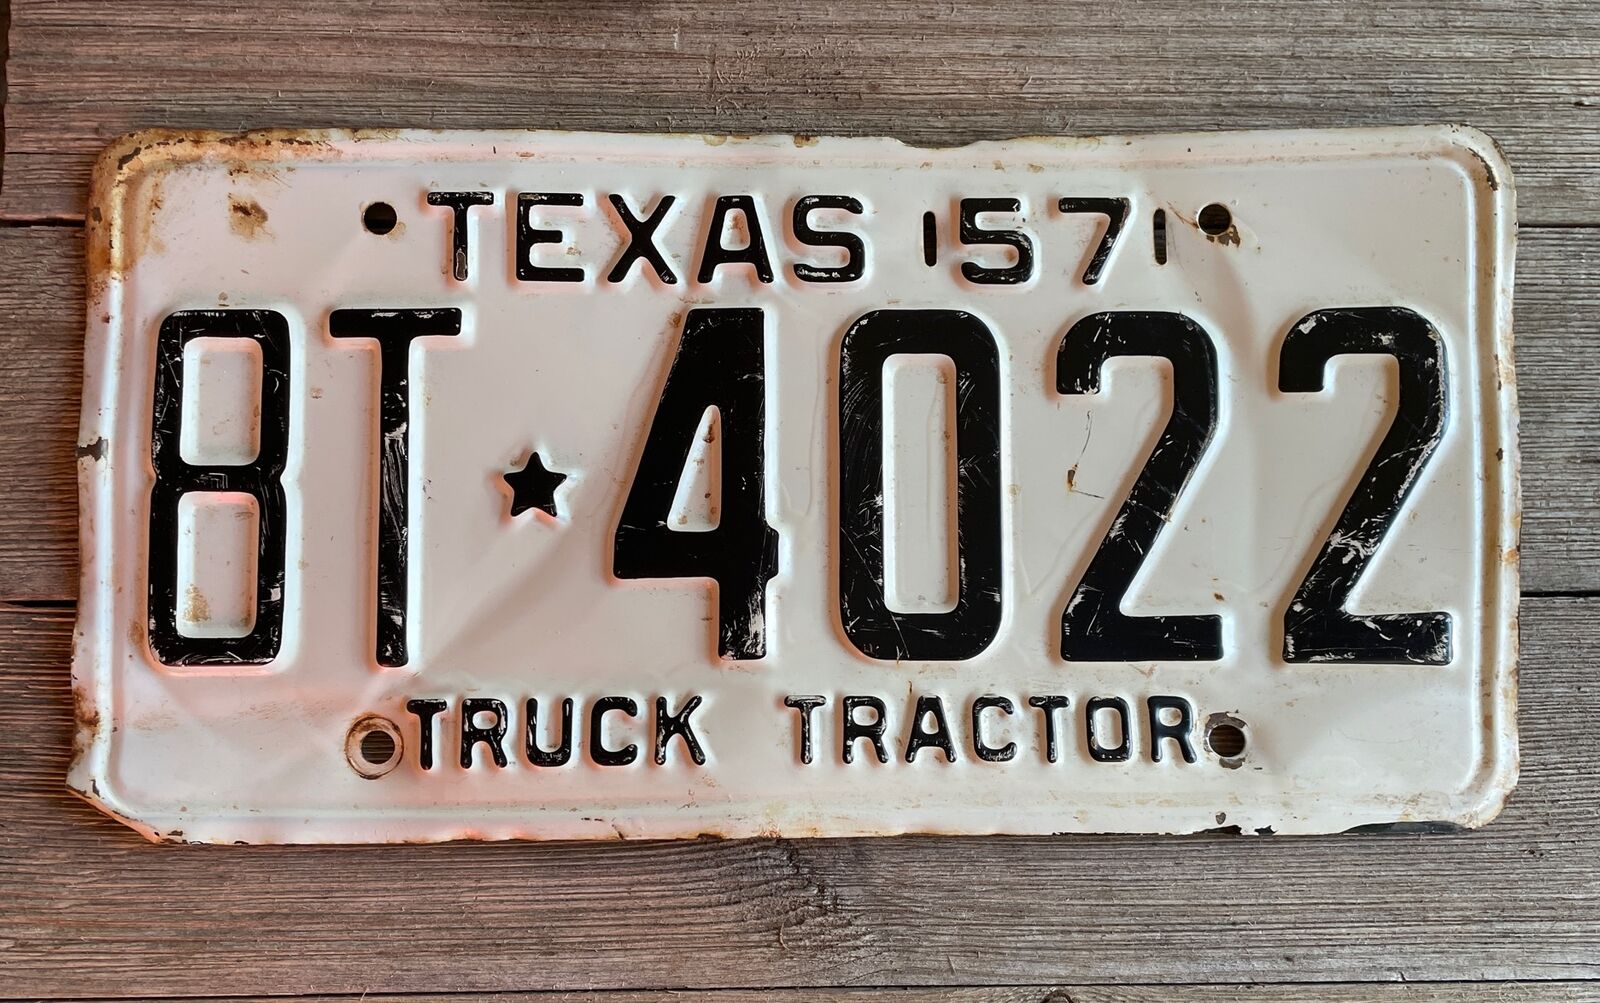 1957 TEXAS VINTAGE TRUCK TRACTOR LICENSE PLATE 8T*4022